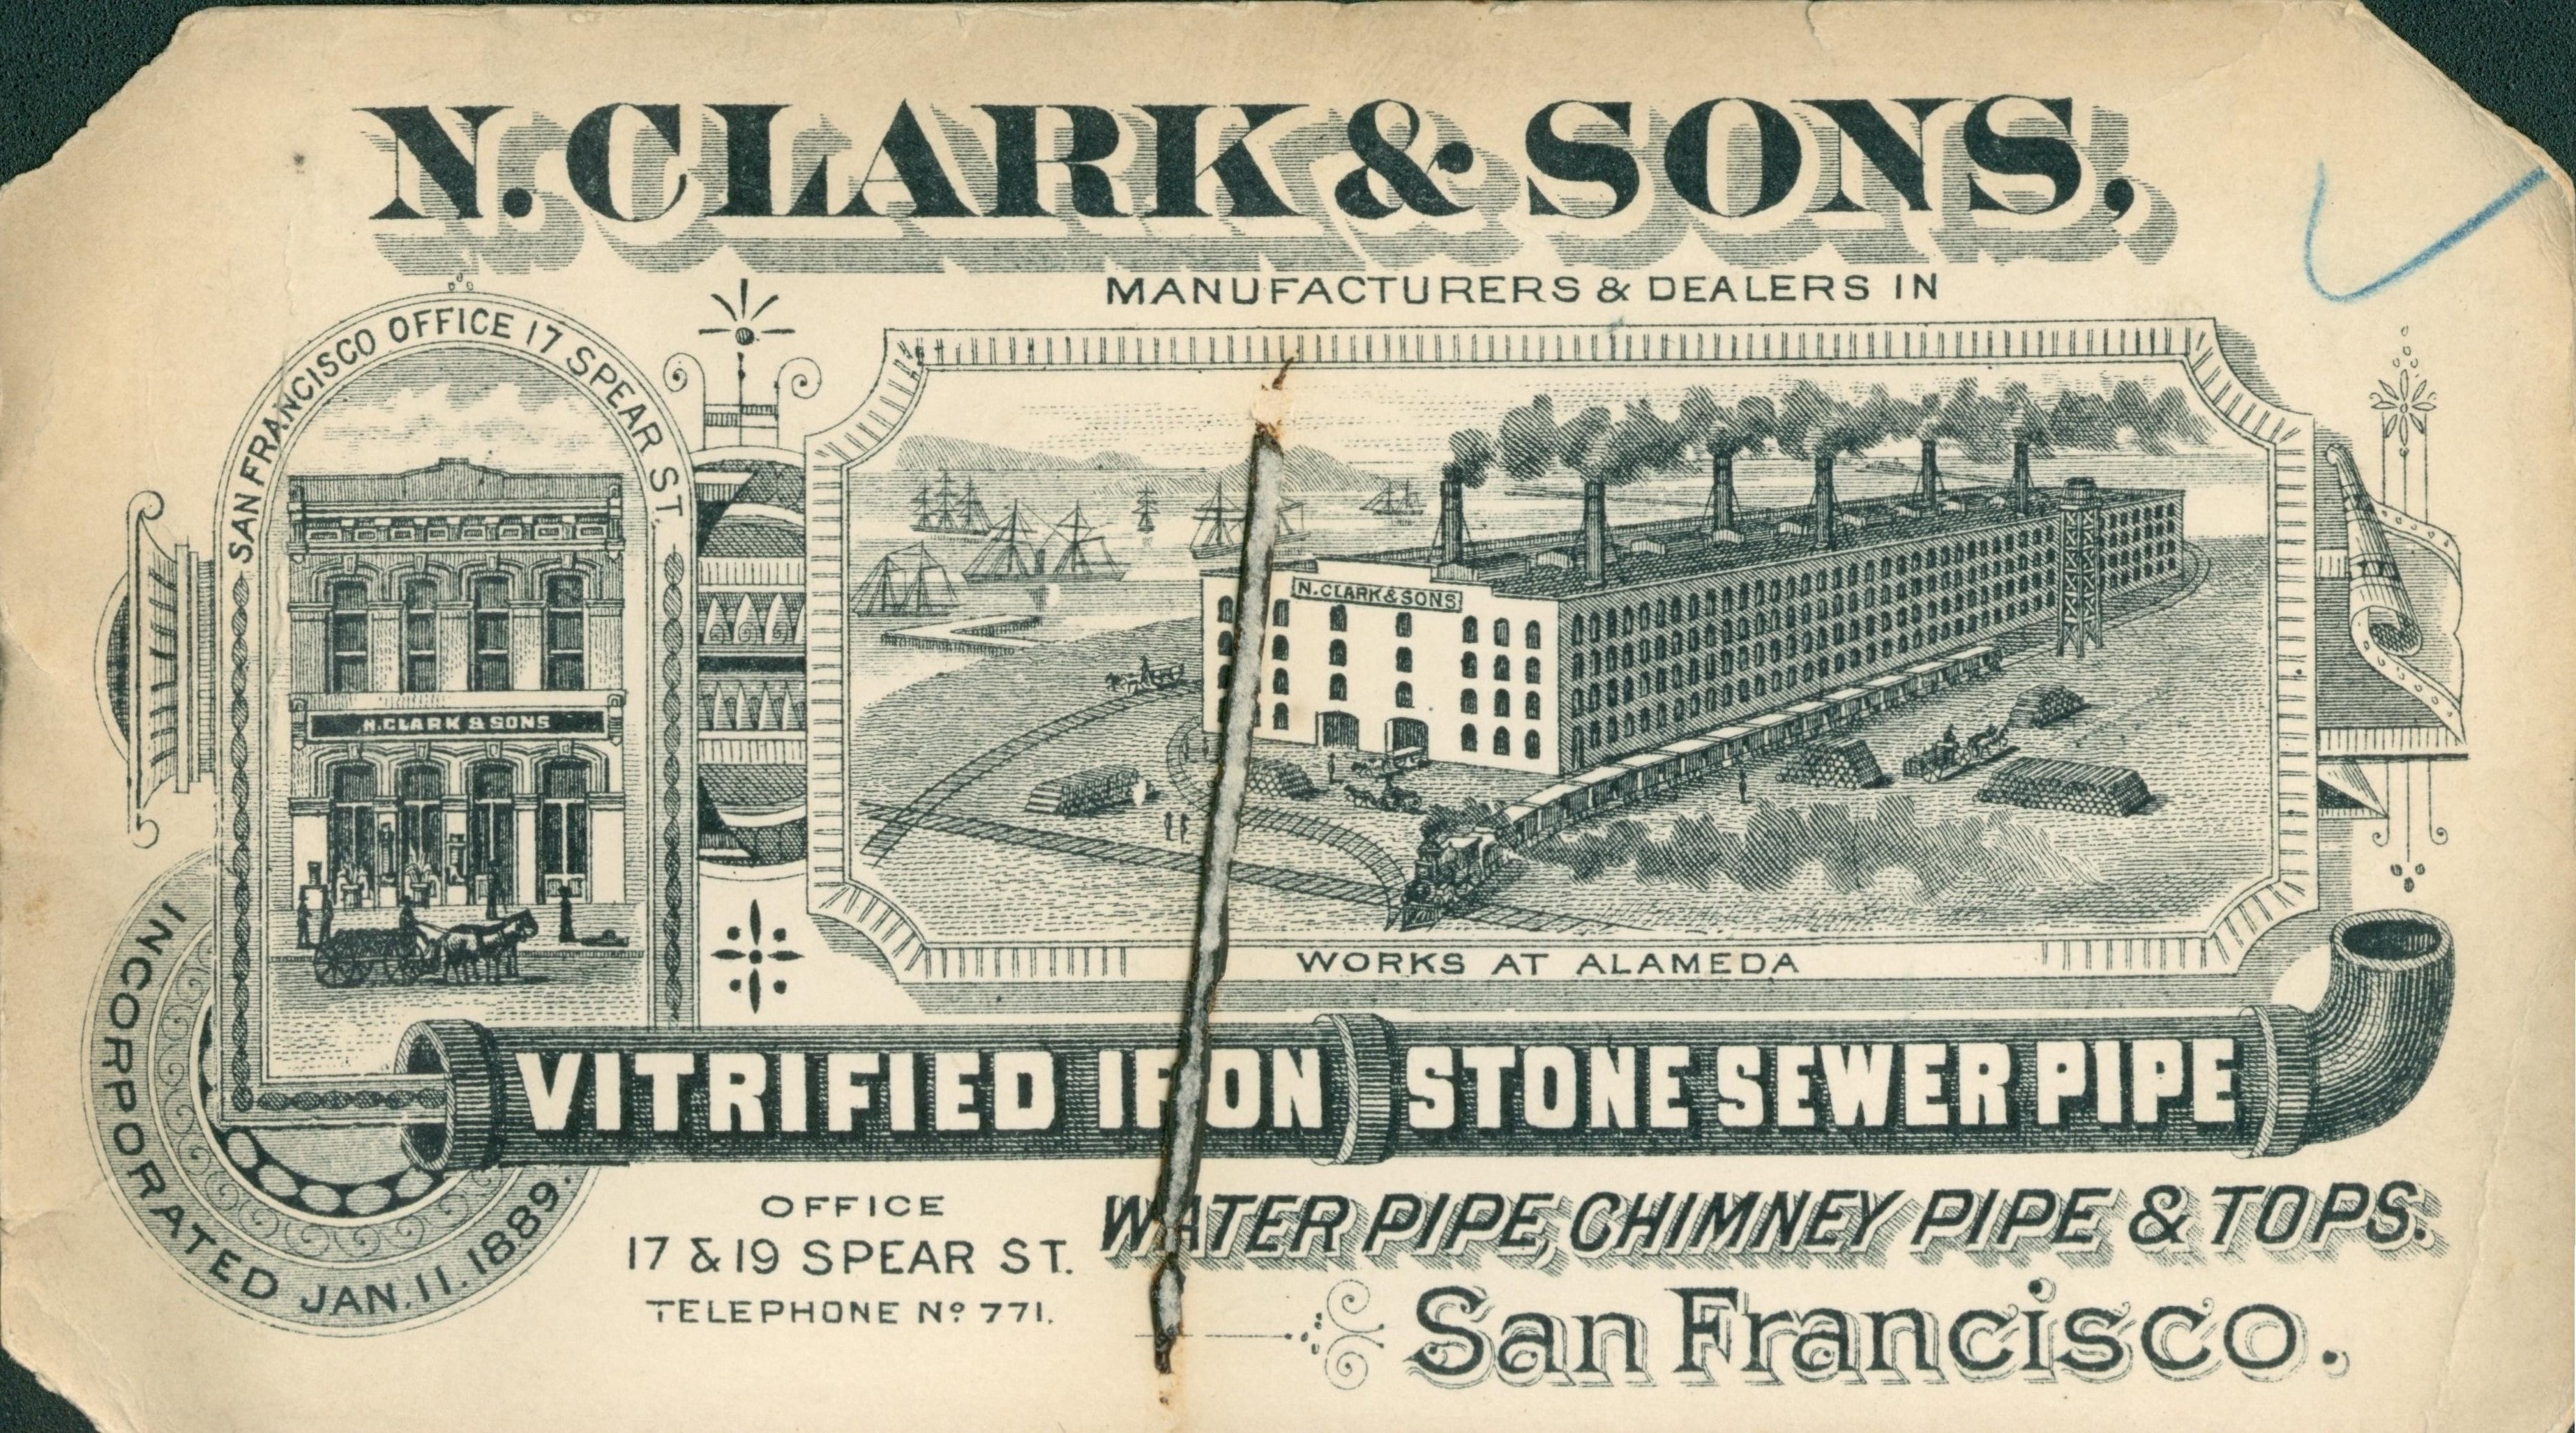 This trade card shows an engraving of the N. Clark & Sons plant in Alameda with the bay in the background.